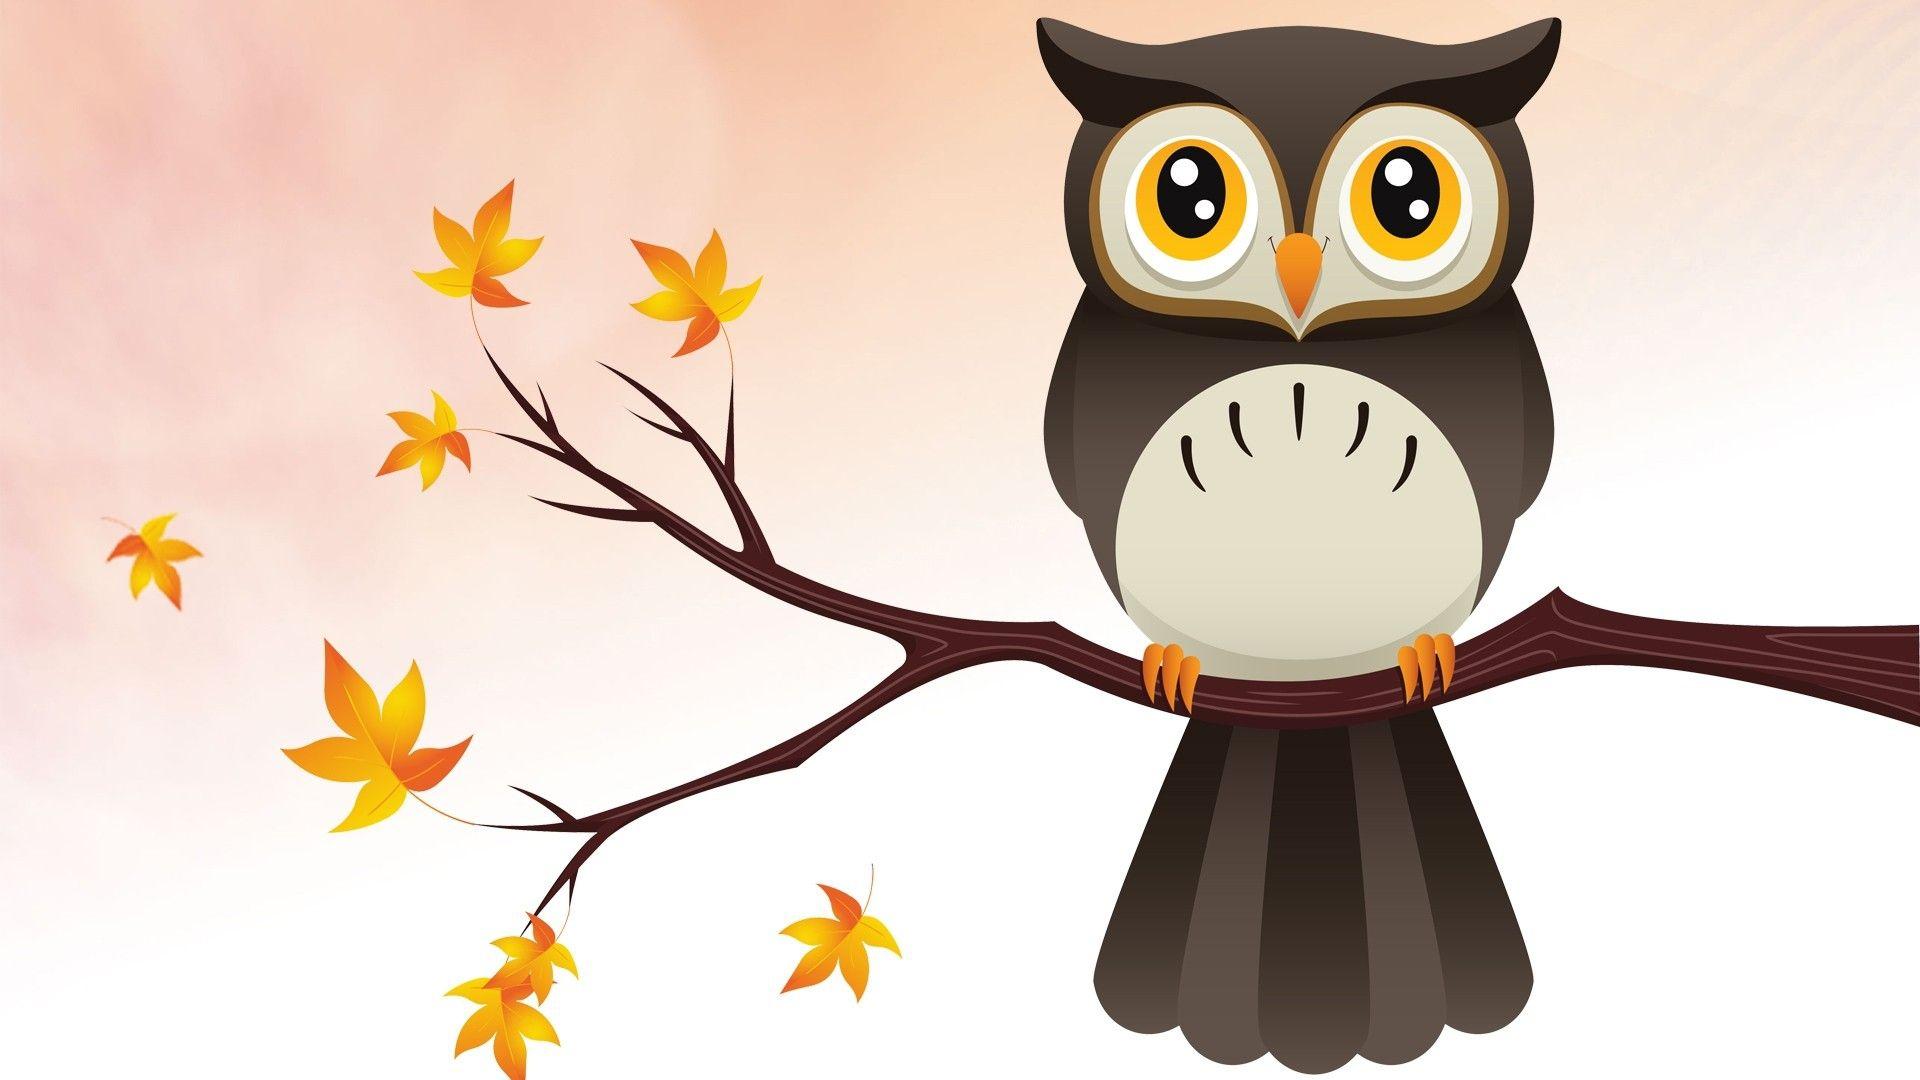 Wallpaper.wiki Cute Owl Background Free Download PIC WPE005169